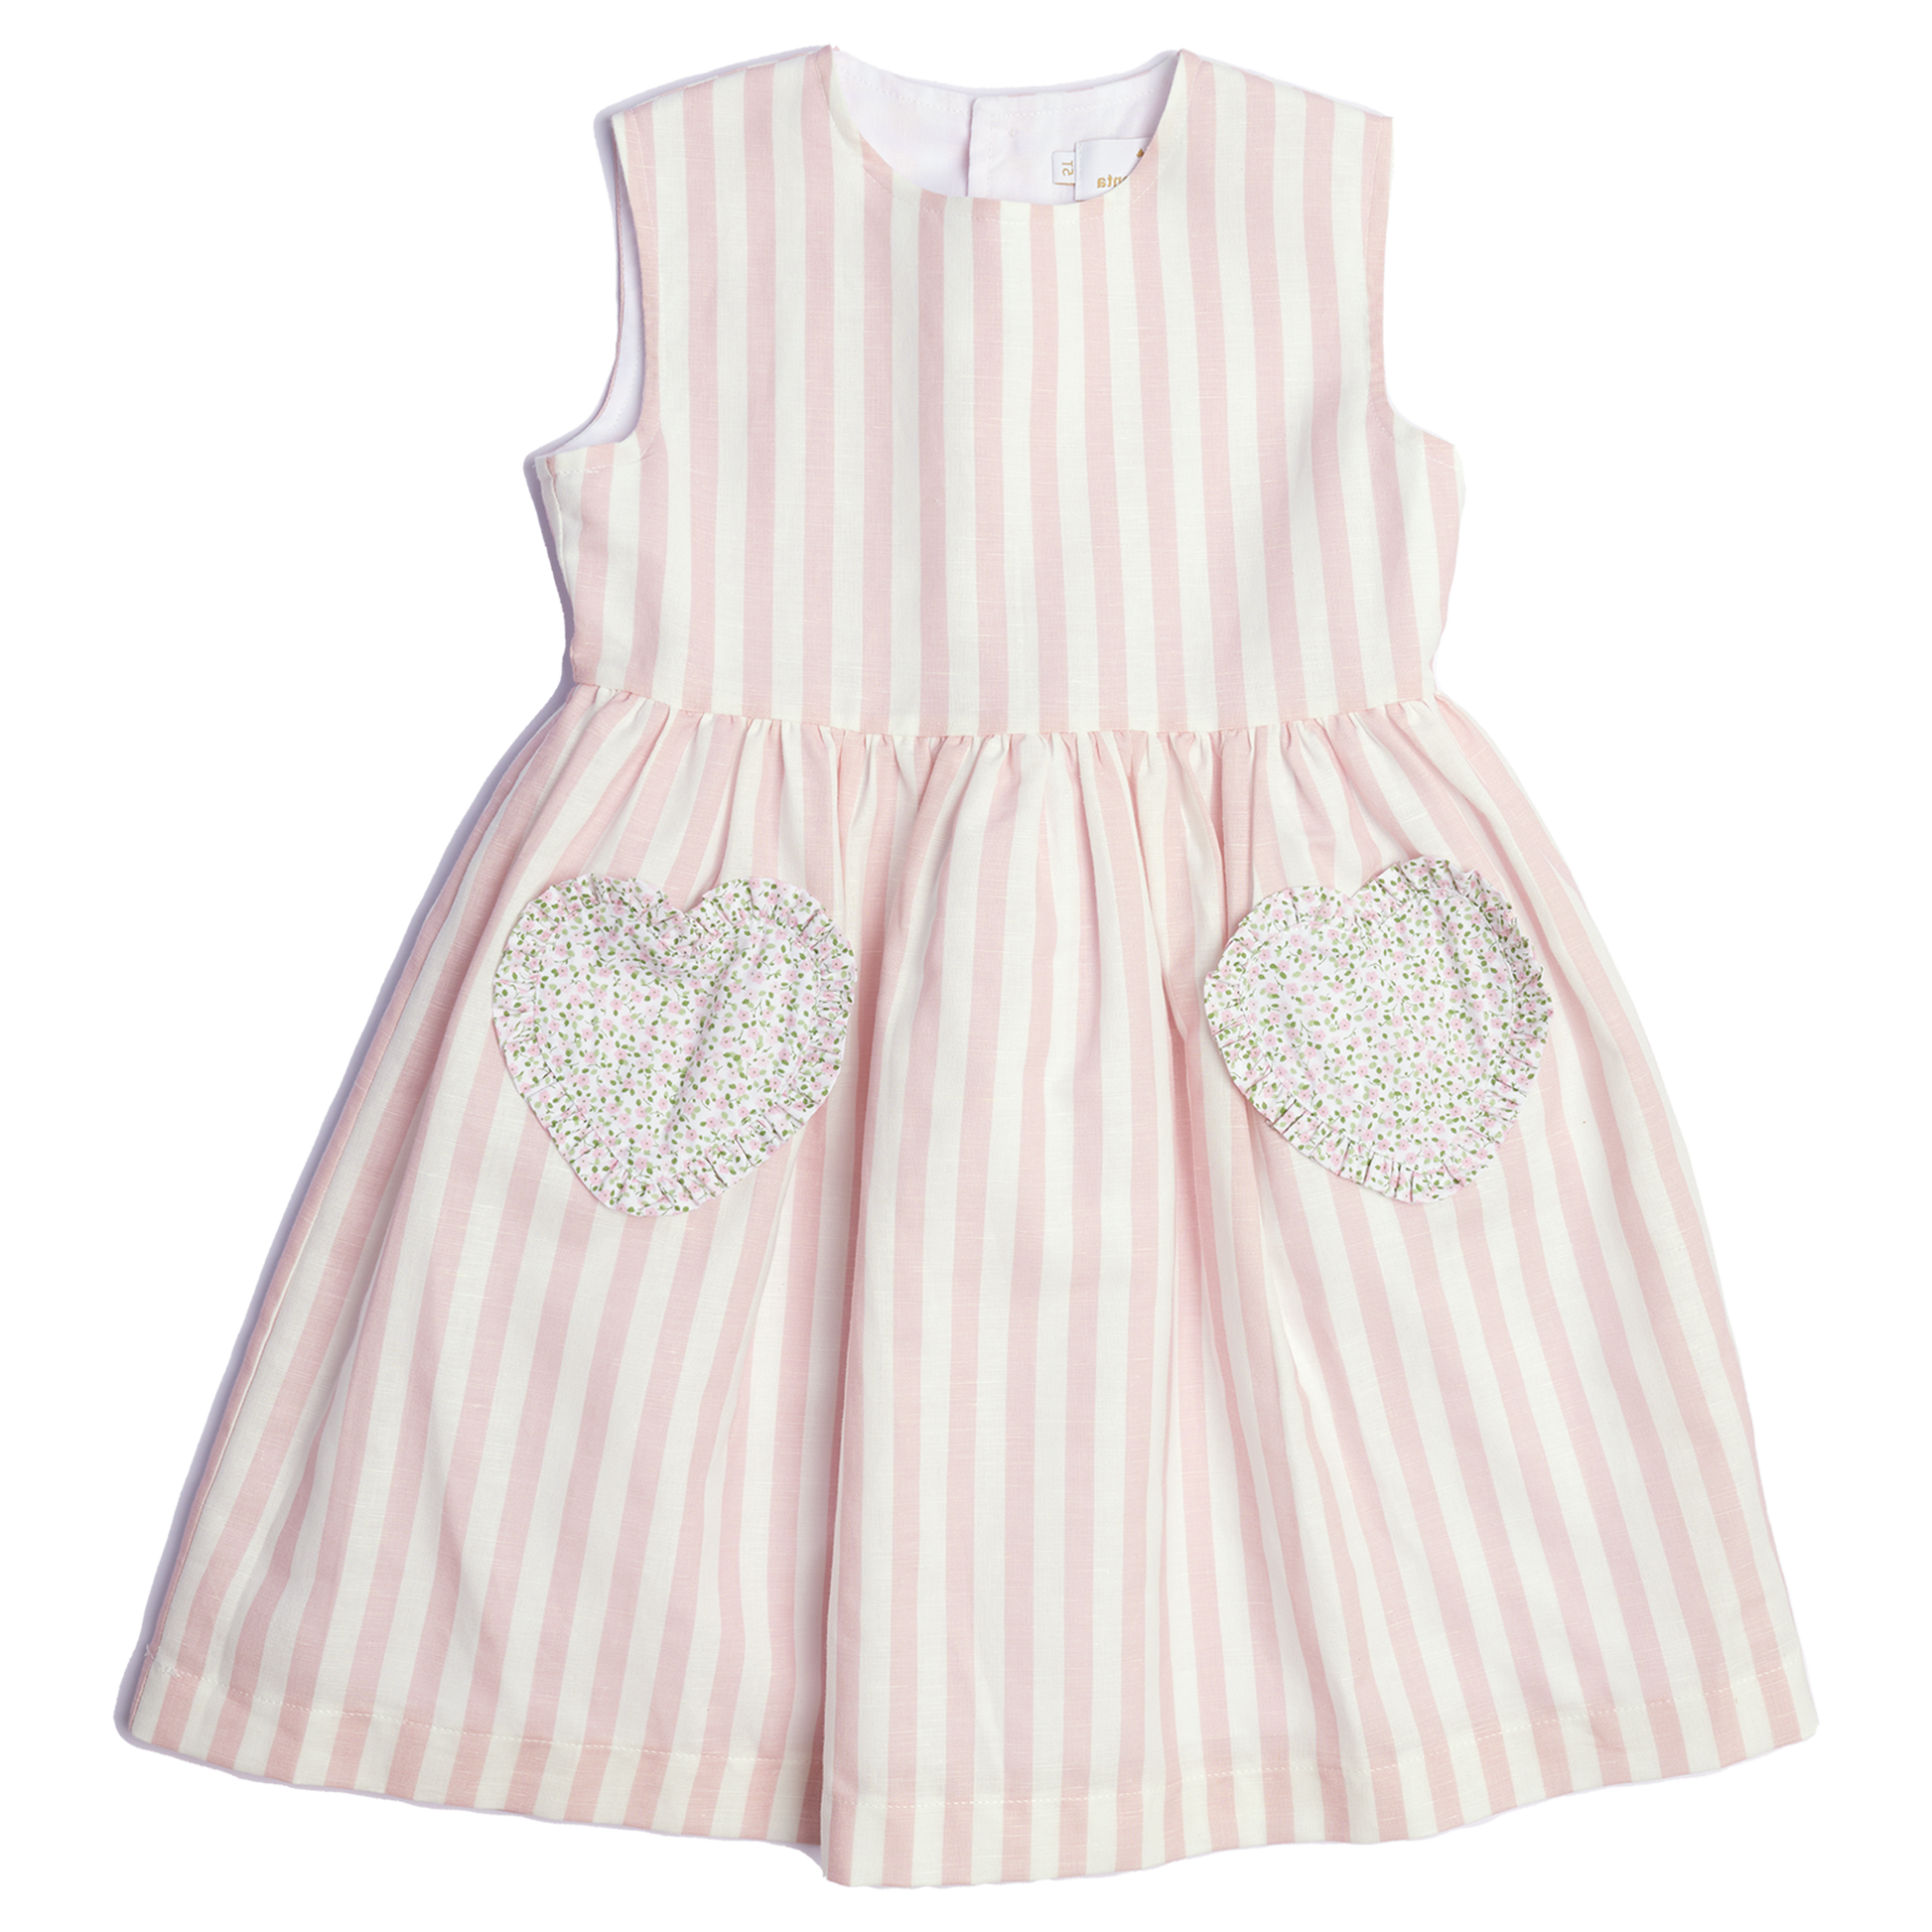 Sal and Pimenta Pink Delight Hearts Children's Dress Dress